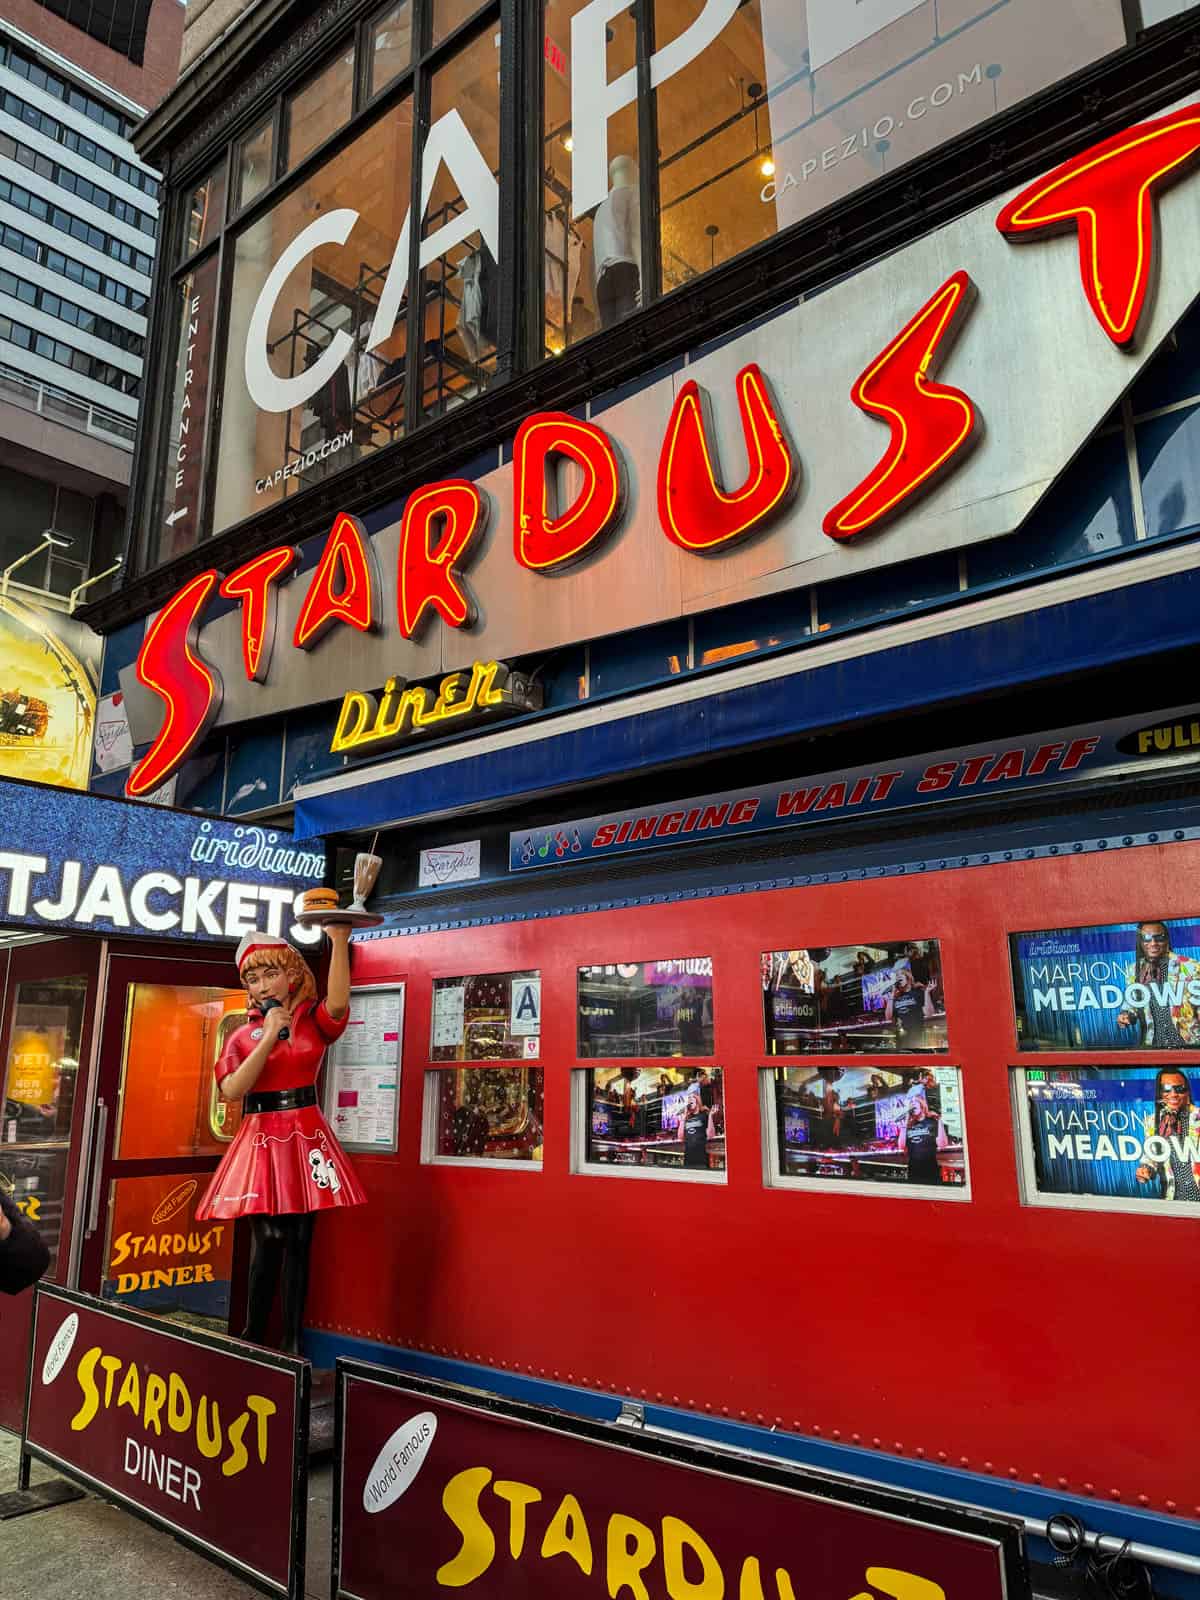 The front of the Stardust Diner on Broadway.